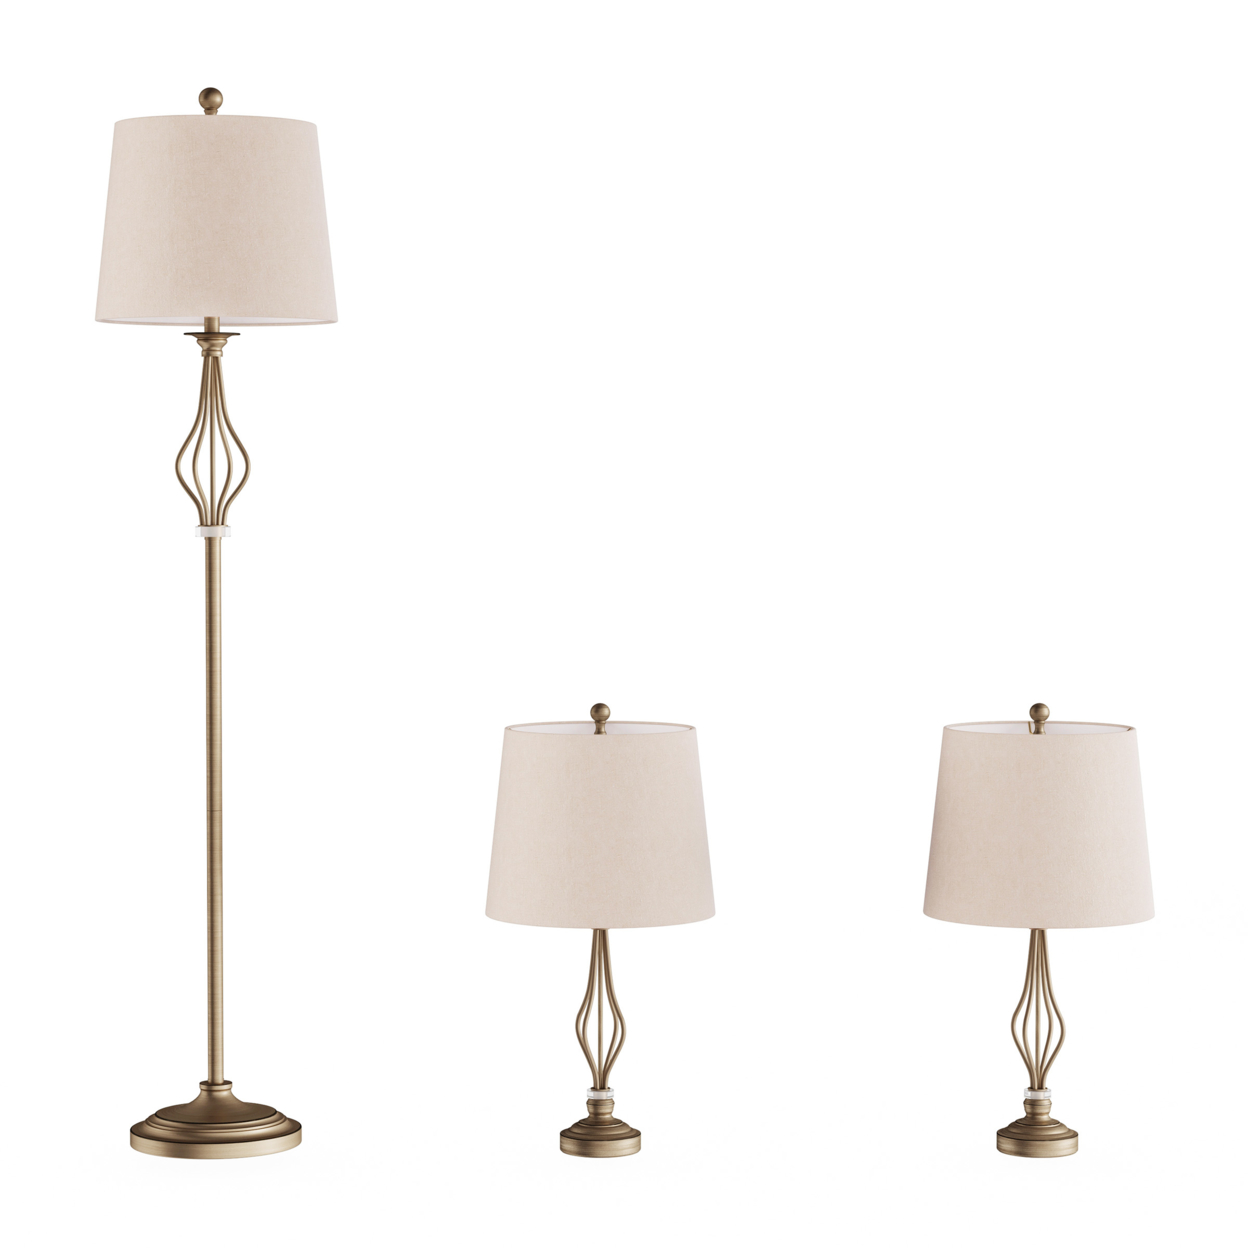 Table And Floor Lamps Set Of 3 Matching Curved Openwork Steel Lighting For Living Room, Bedroom